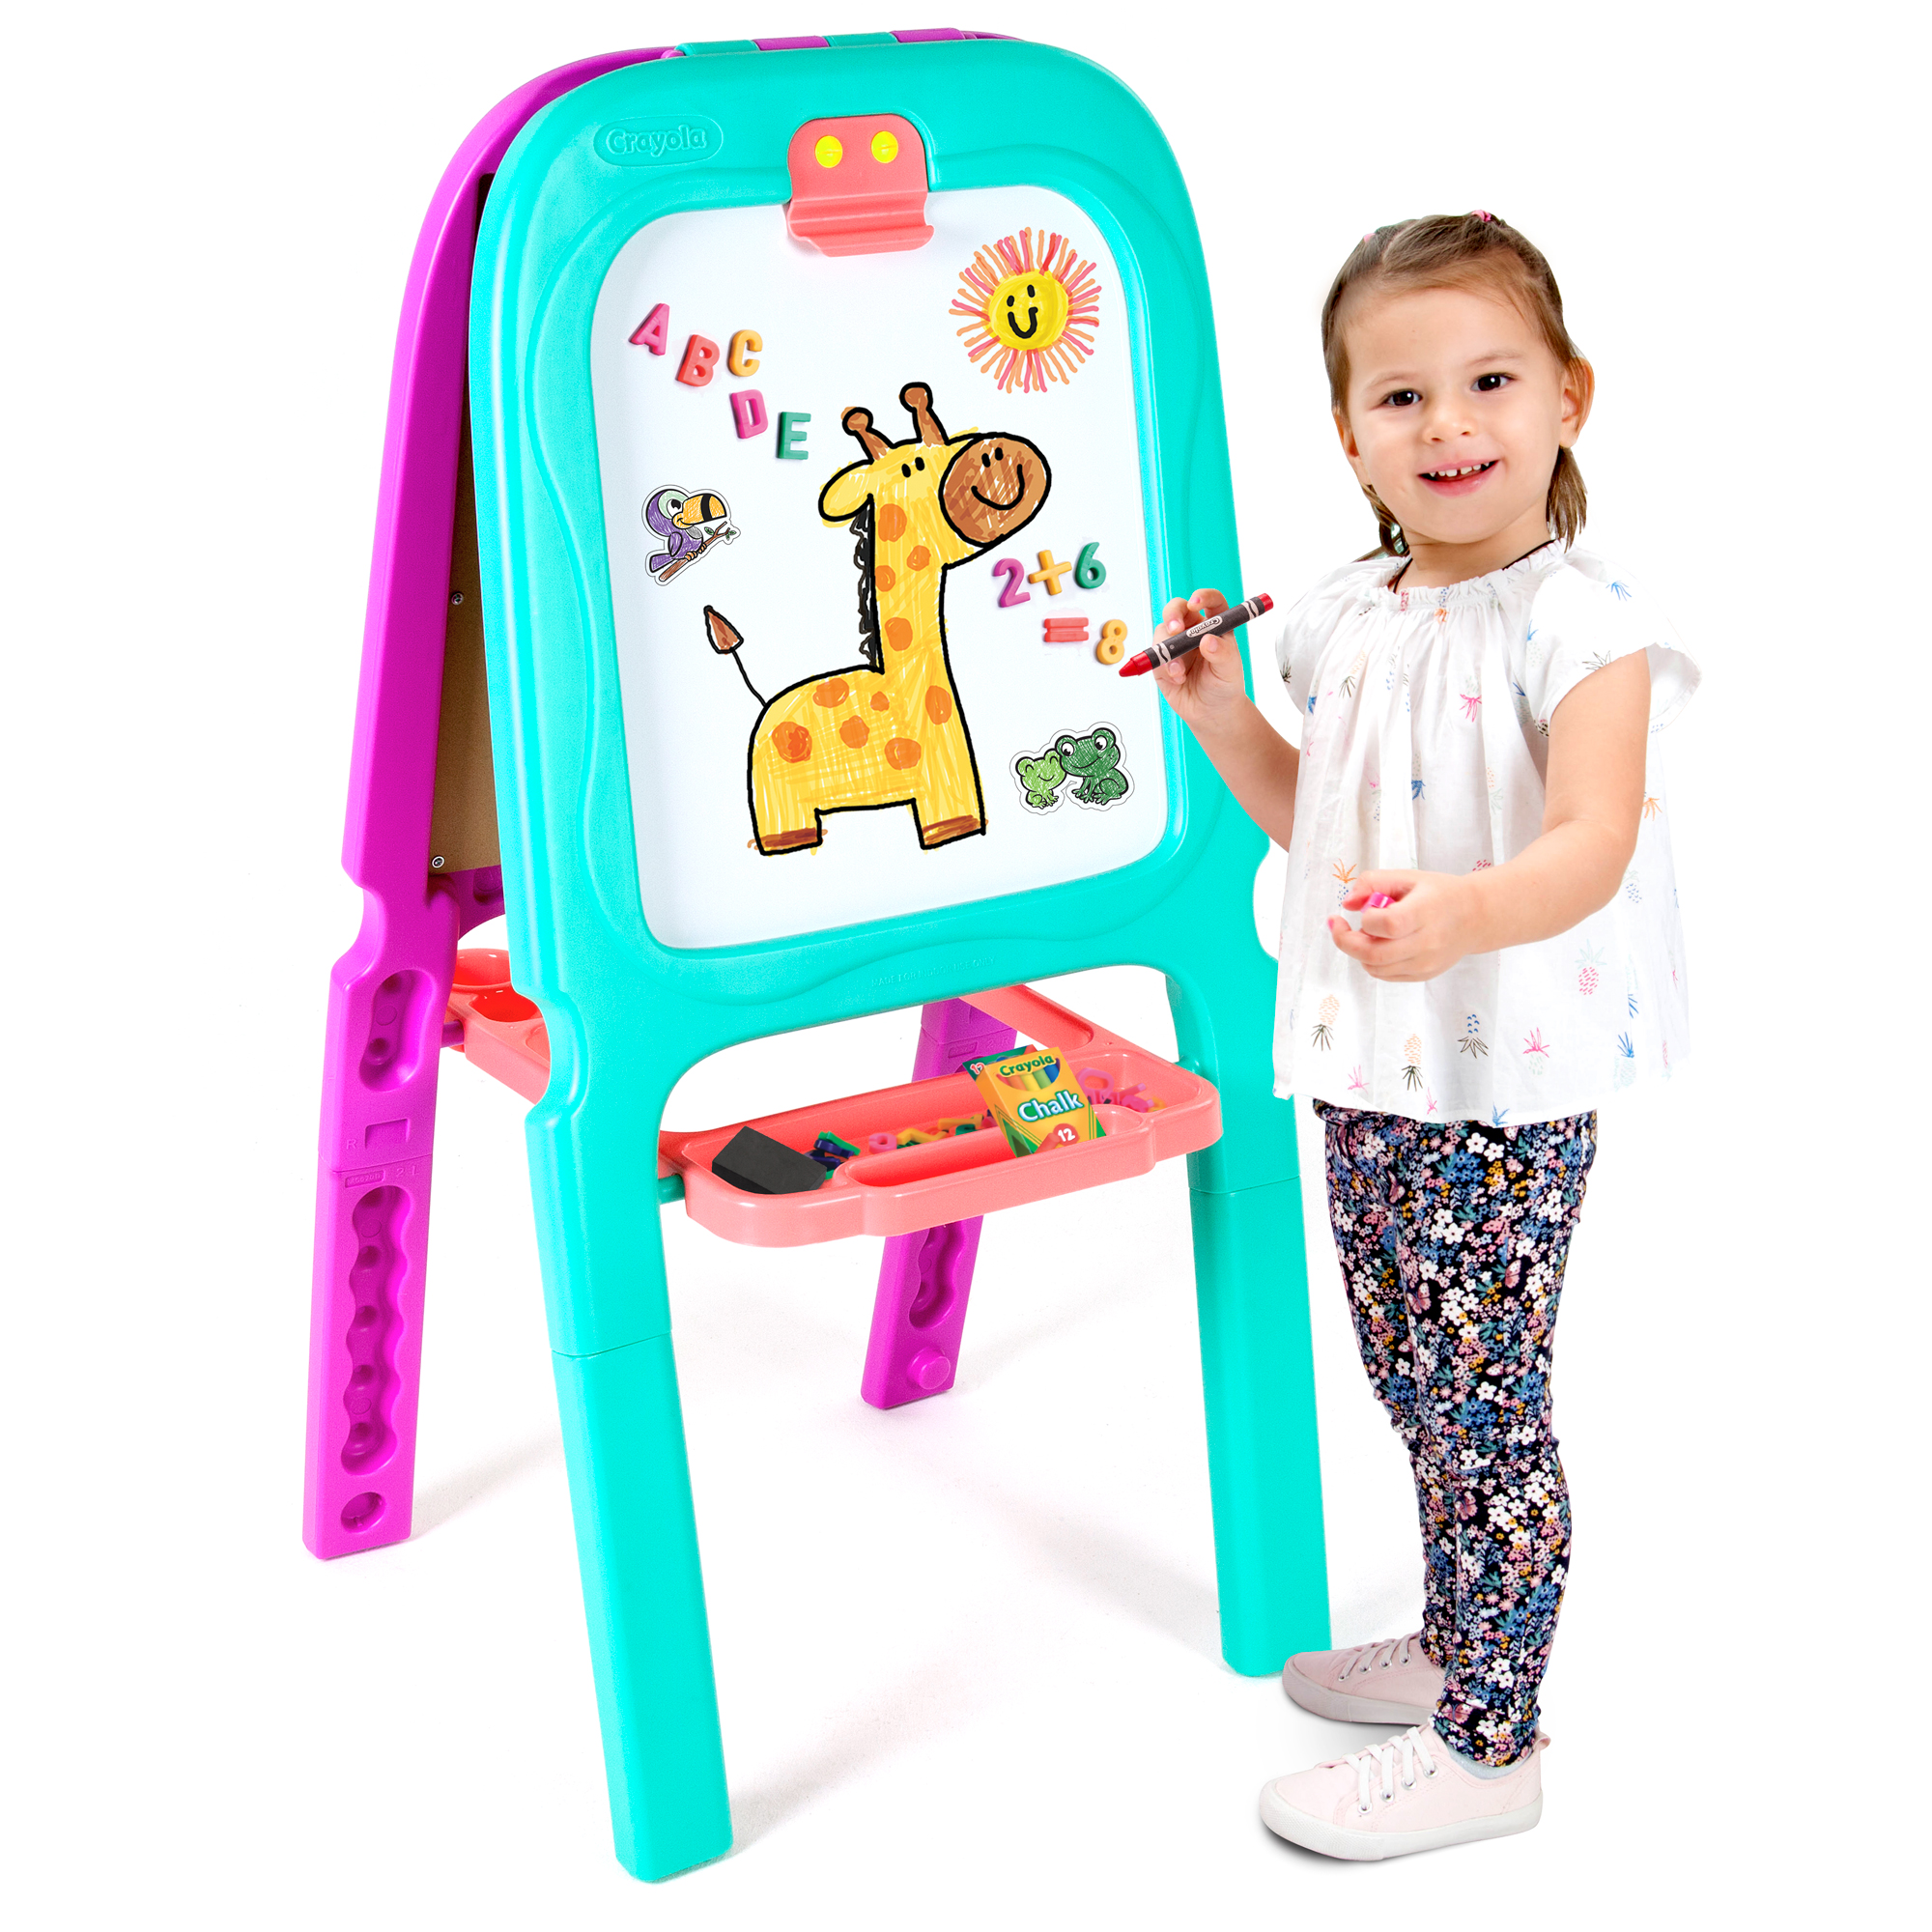 Crayola Purple & Turquoise 3-in-1 Double Easel With Storage, 77 Magnetic Letters/Numbers + 2 Sticker Sheets - image 1 of 8